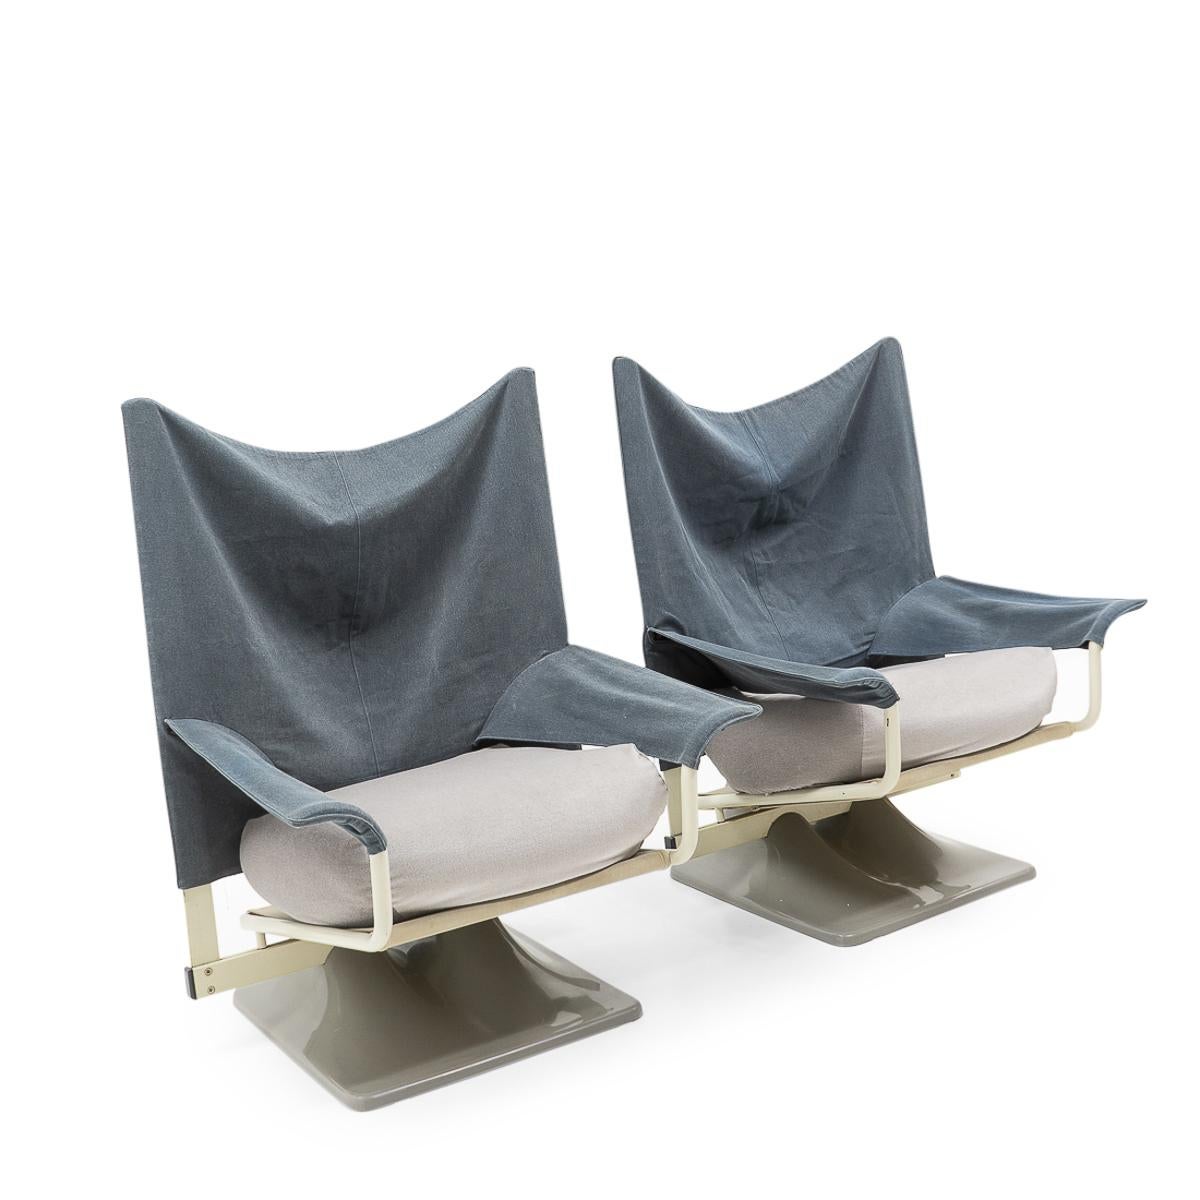 AEO armchair designed by Paolo Deganello (co-founder of Archizoom Italy) during the 1970s, representing his interpretation of an armchair, using for that time unconventional materials for a lounge chair construction.

These AEO chairs have been